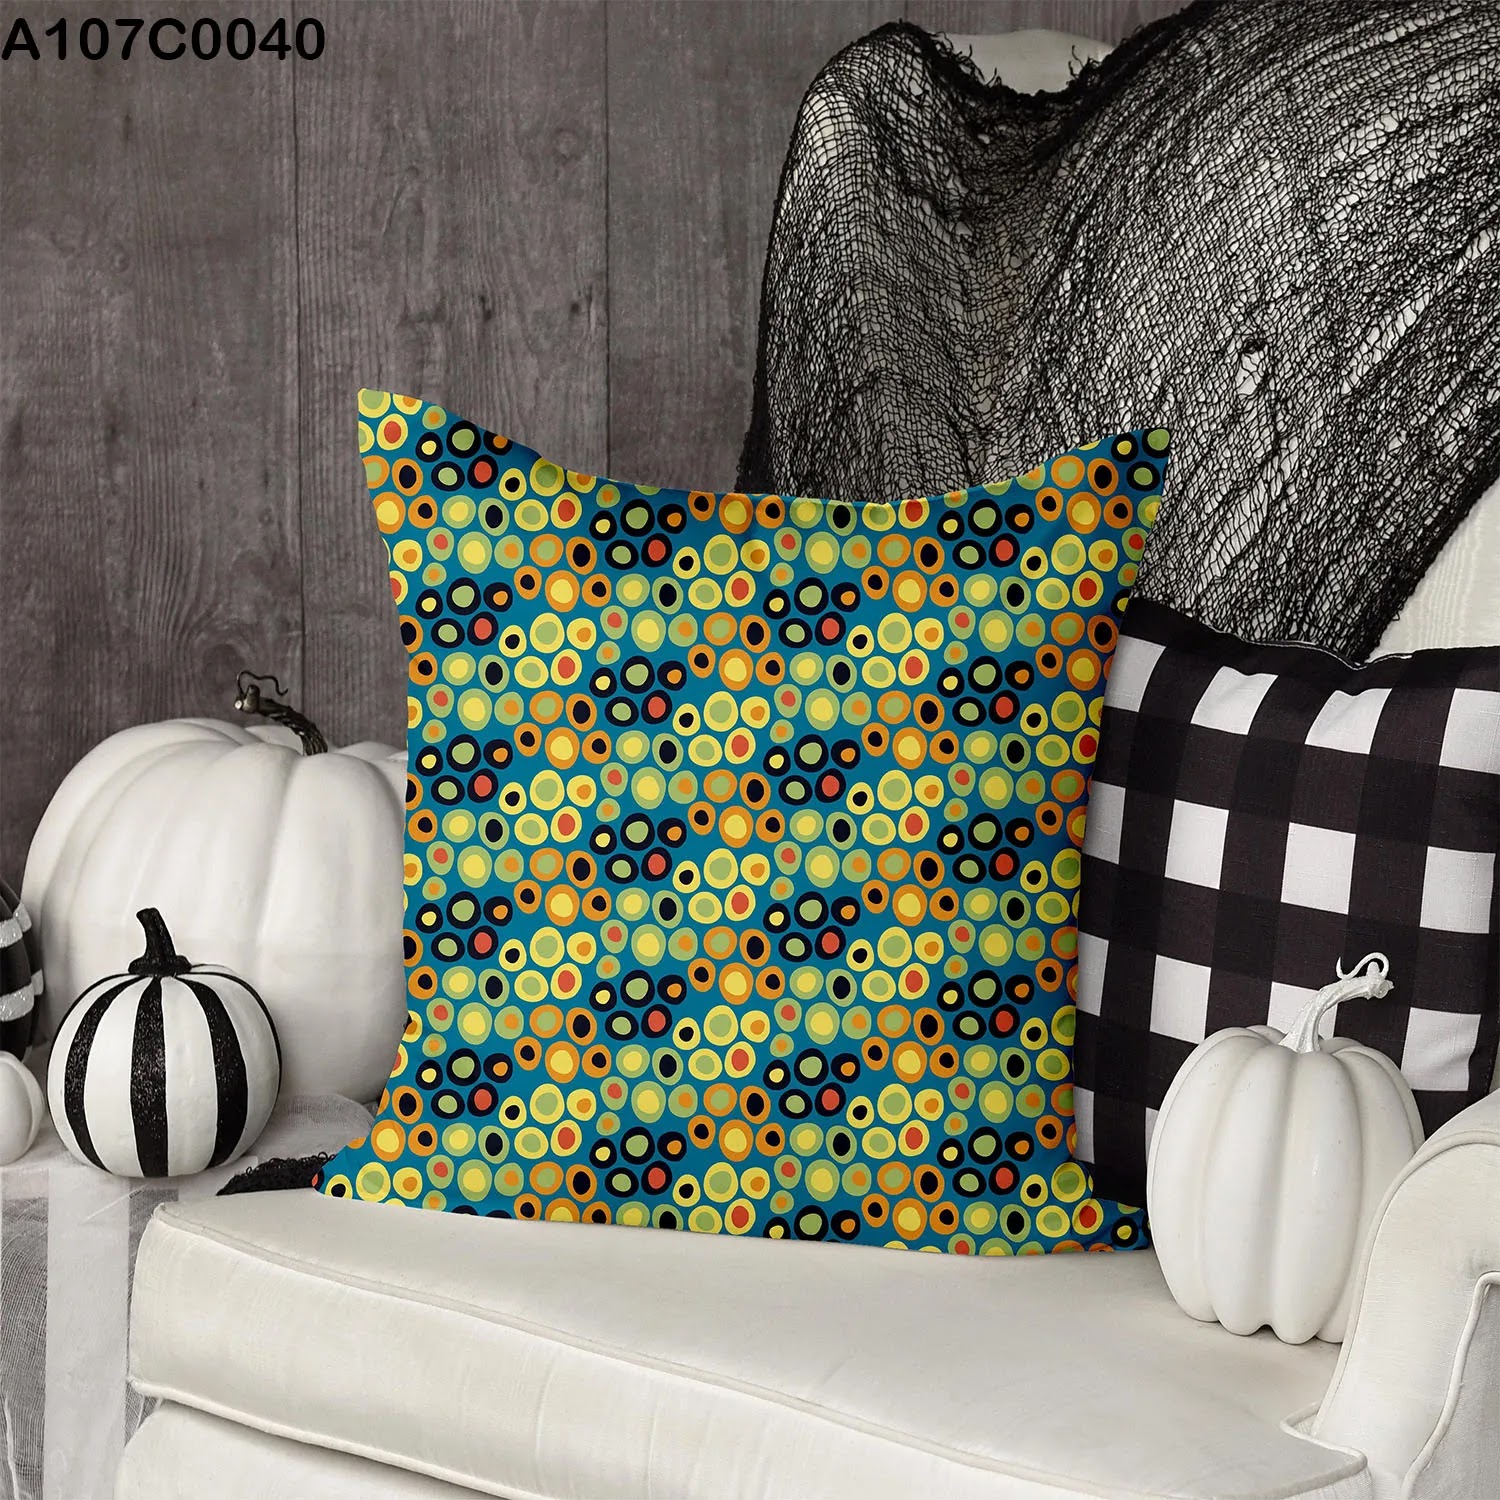 Dark blue pillow case with yellow & orange patches